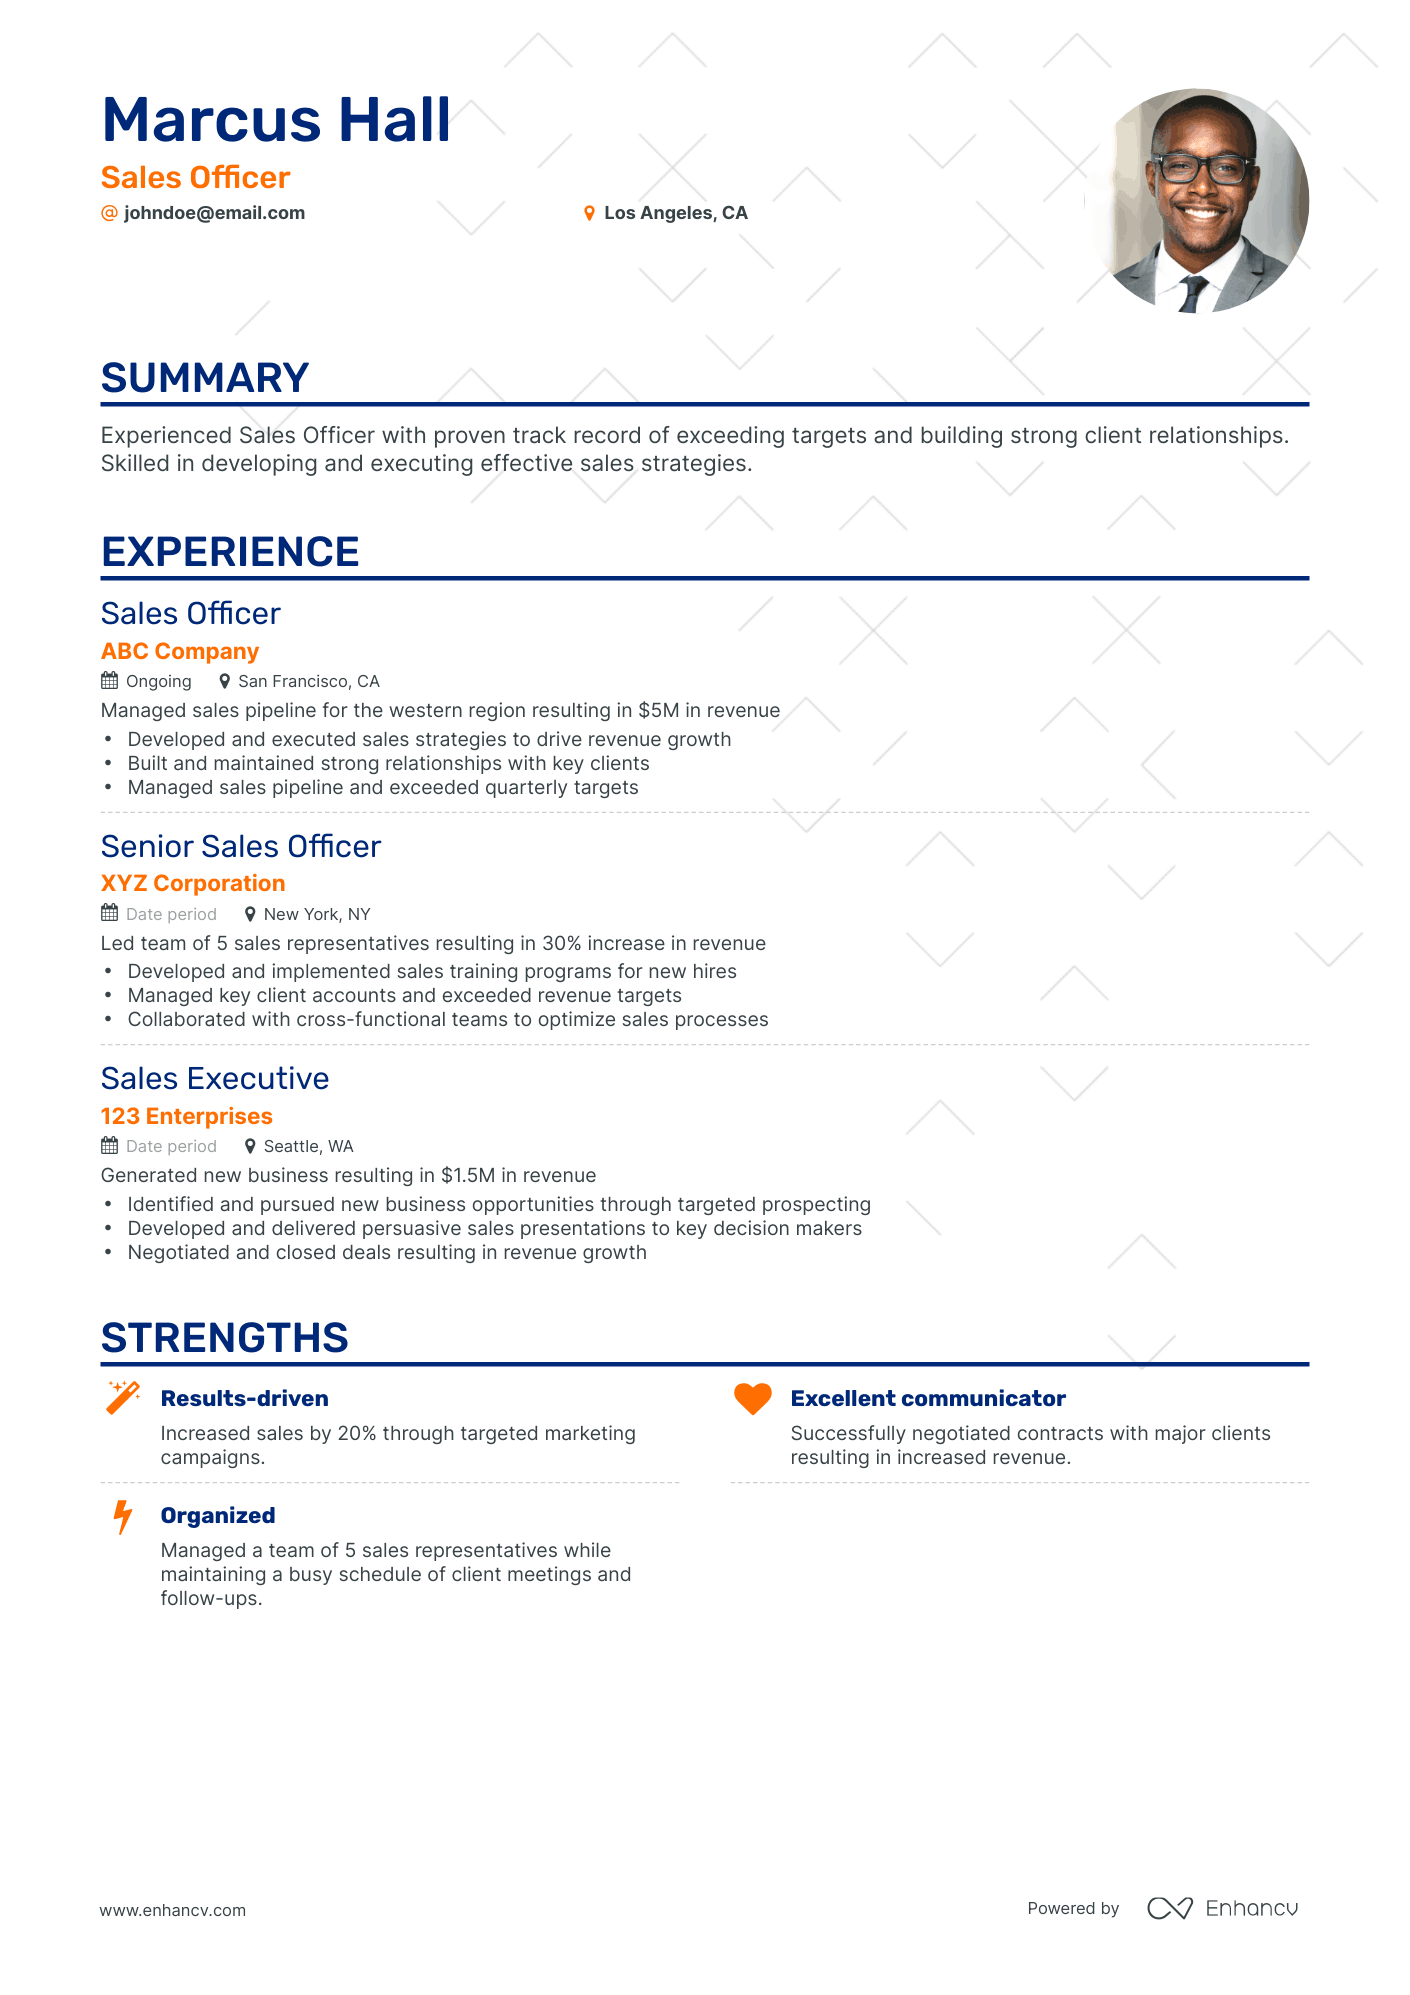 Classic Sales Officer Resume Template